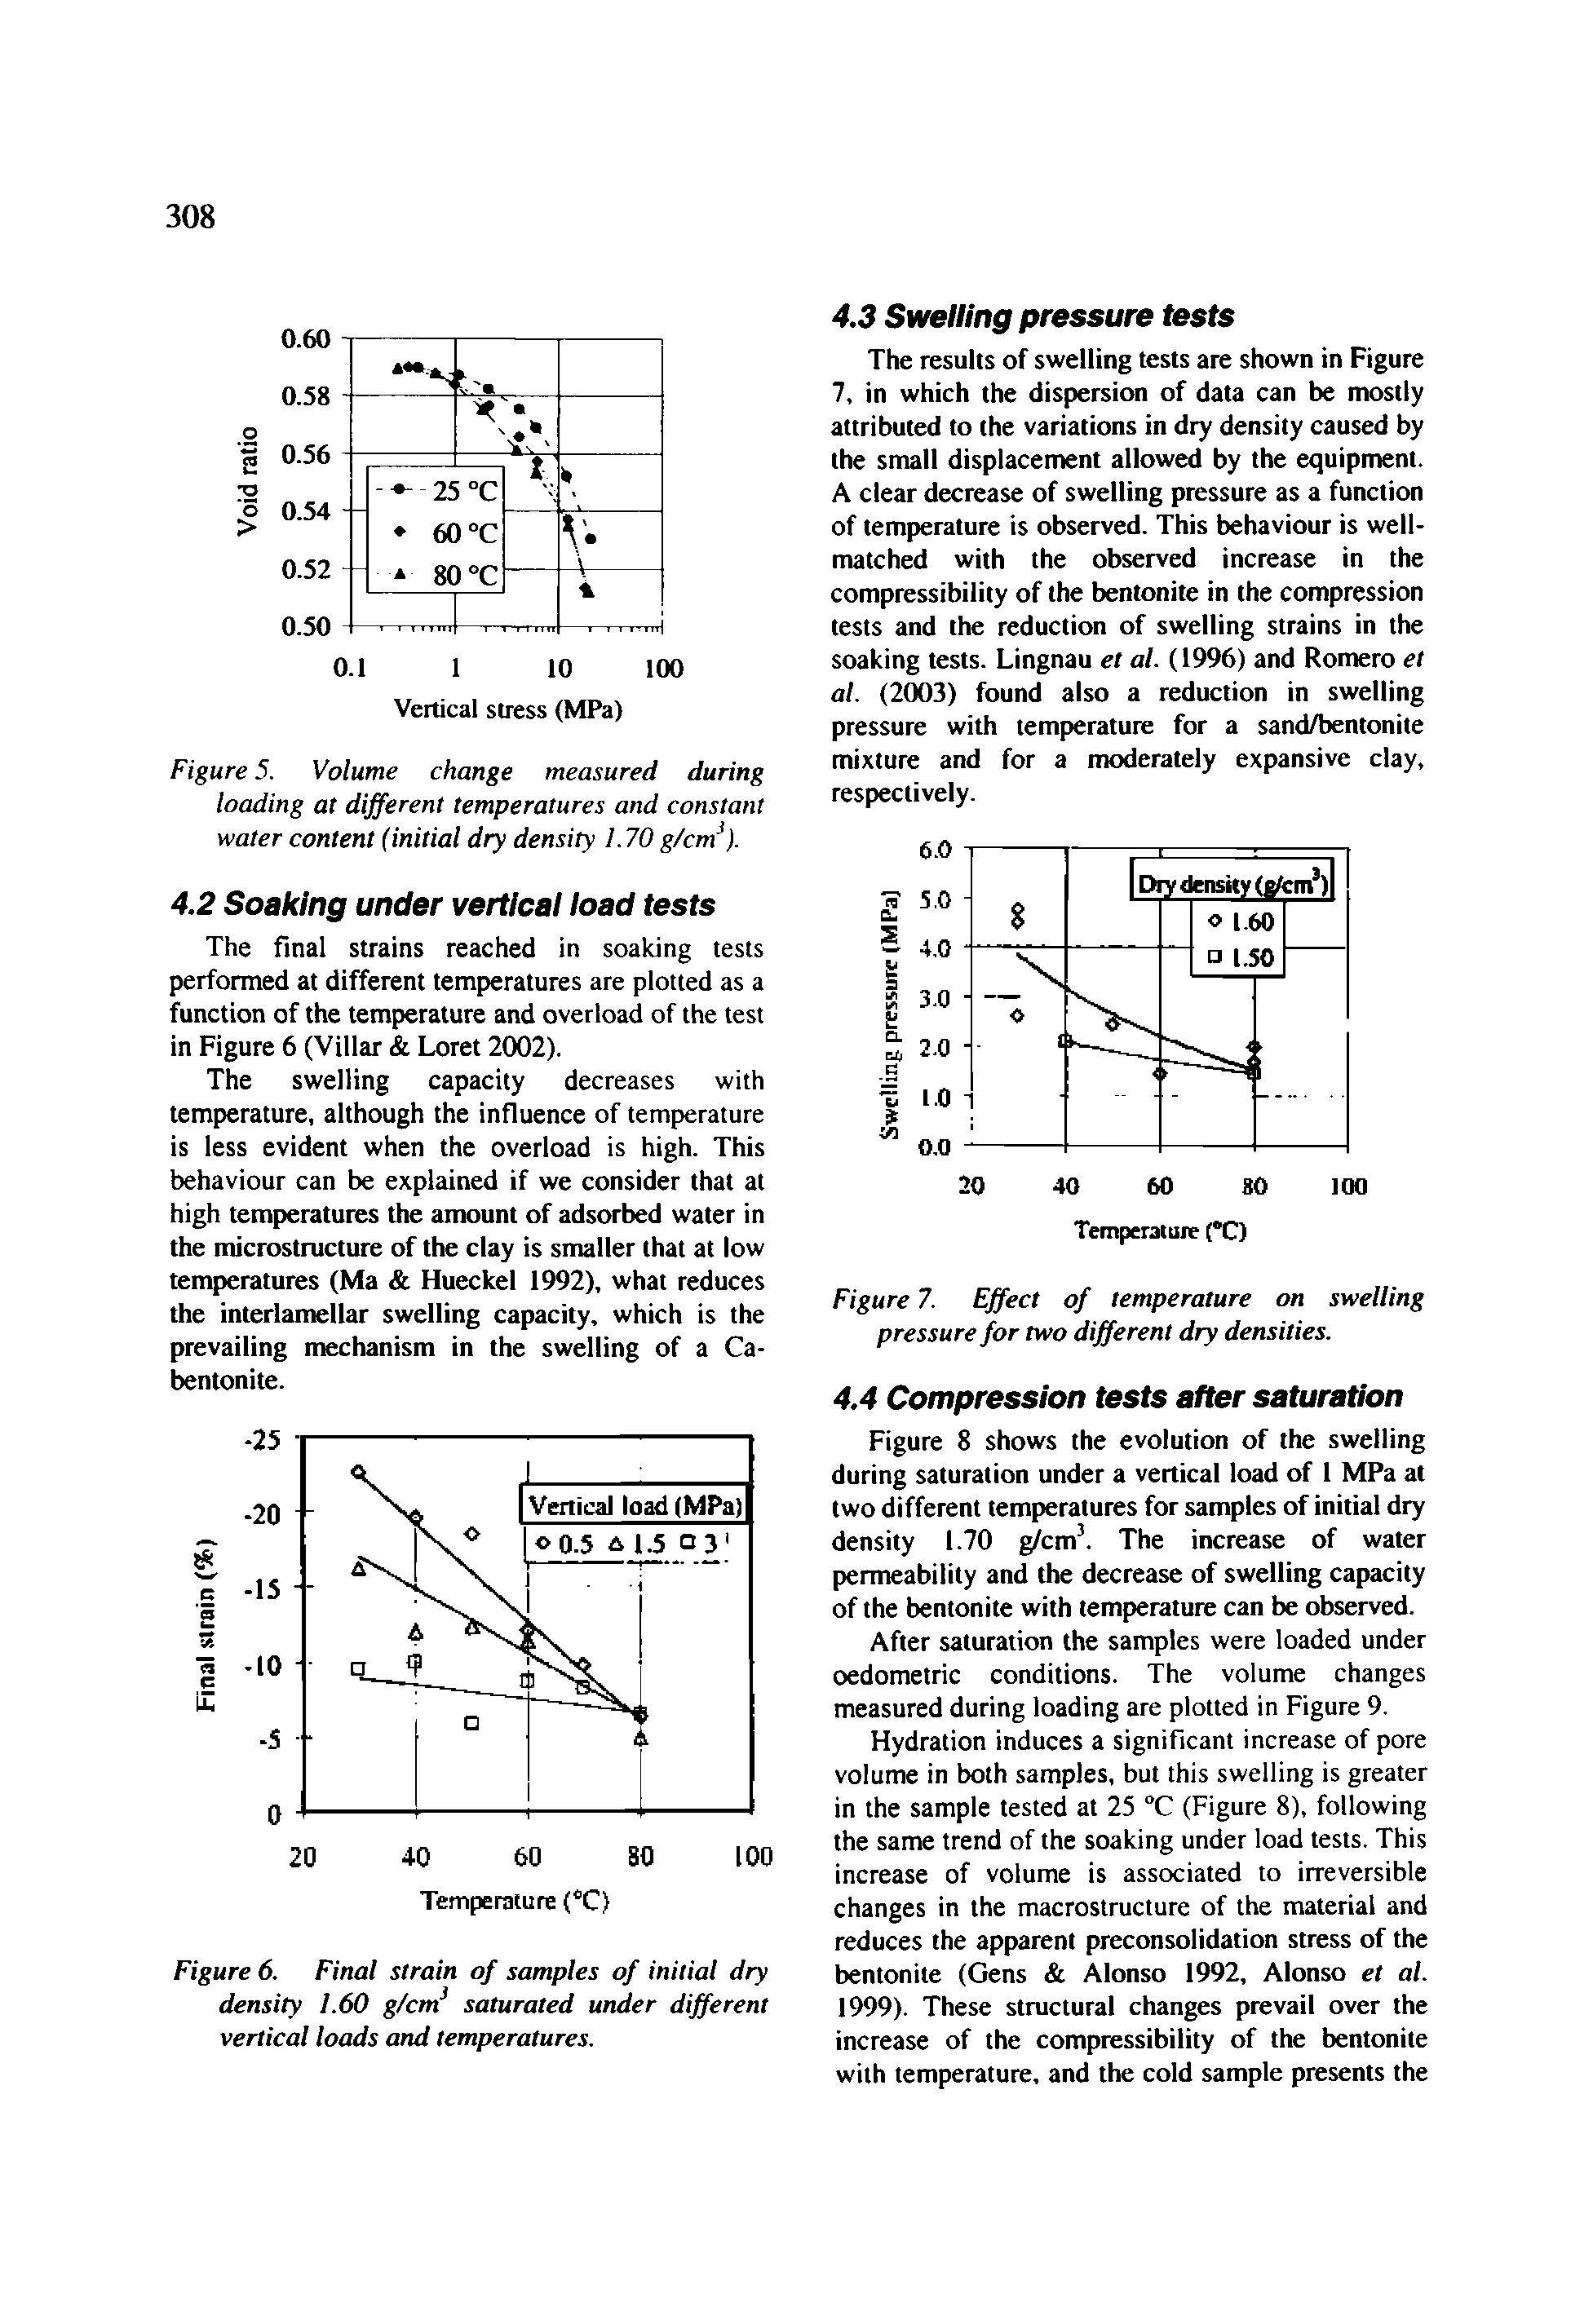 Figure 5. Volume change measured during loading at different temperatures and constant water content (initial dry density 1.70 g/cm ).